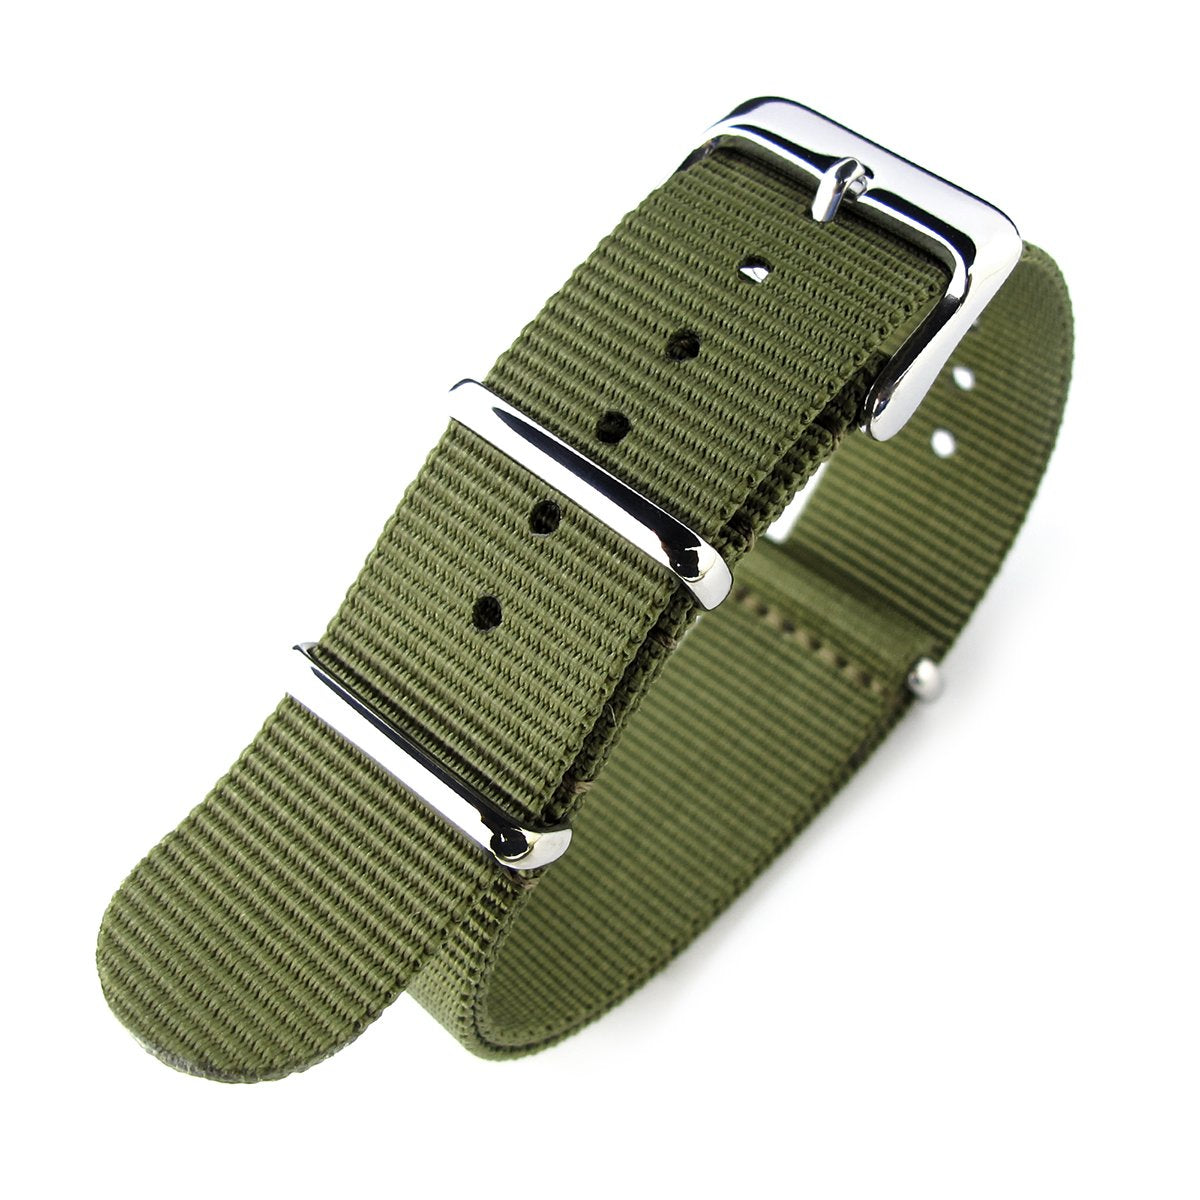 NATO 18mm or 20mm G10 Military Watch Band Nylon Strap Military Green Polished 260mm Strapcode Watch Bands